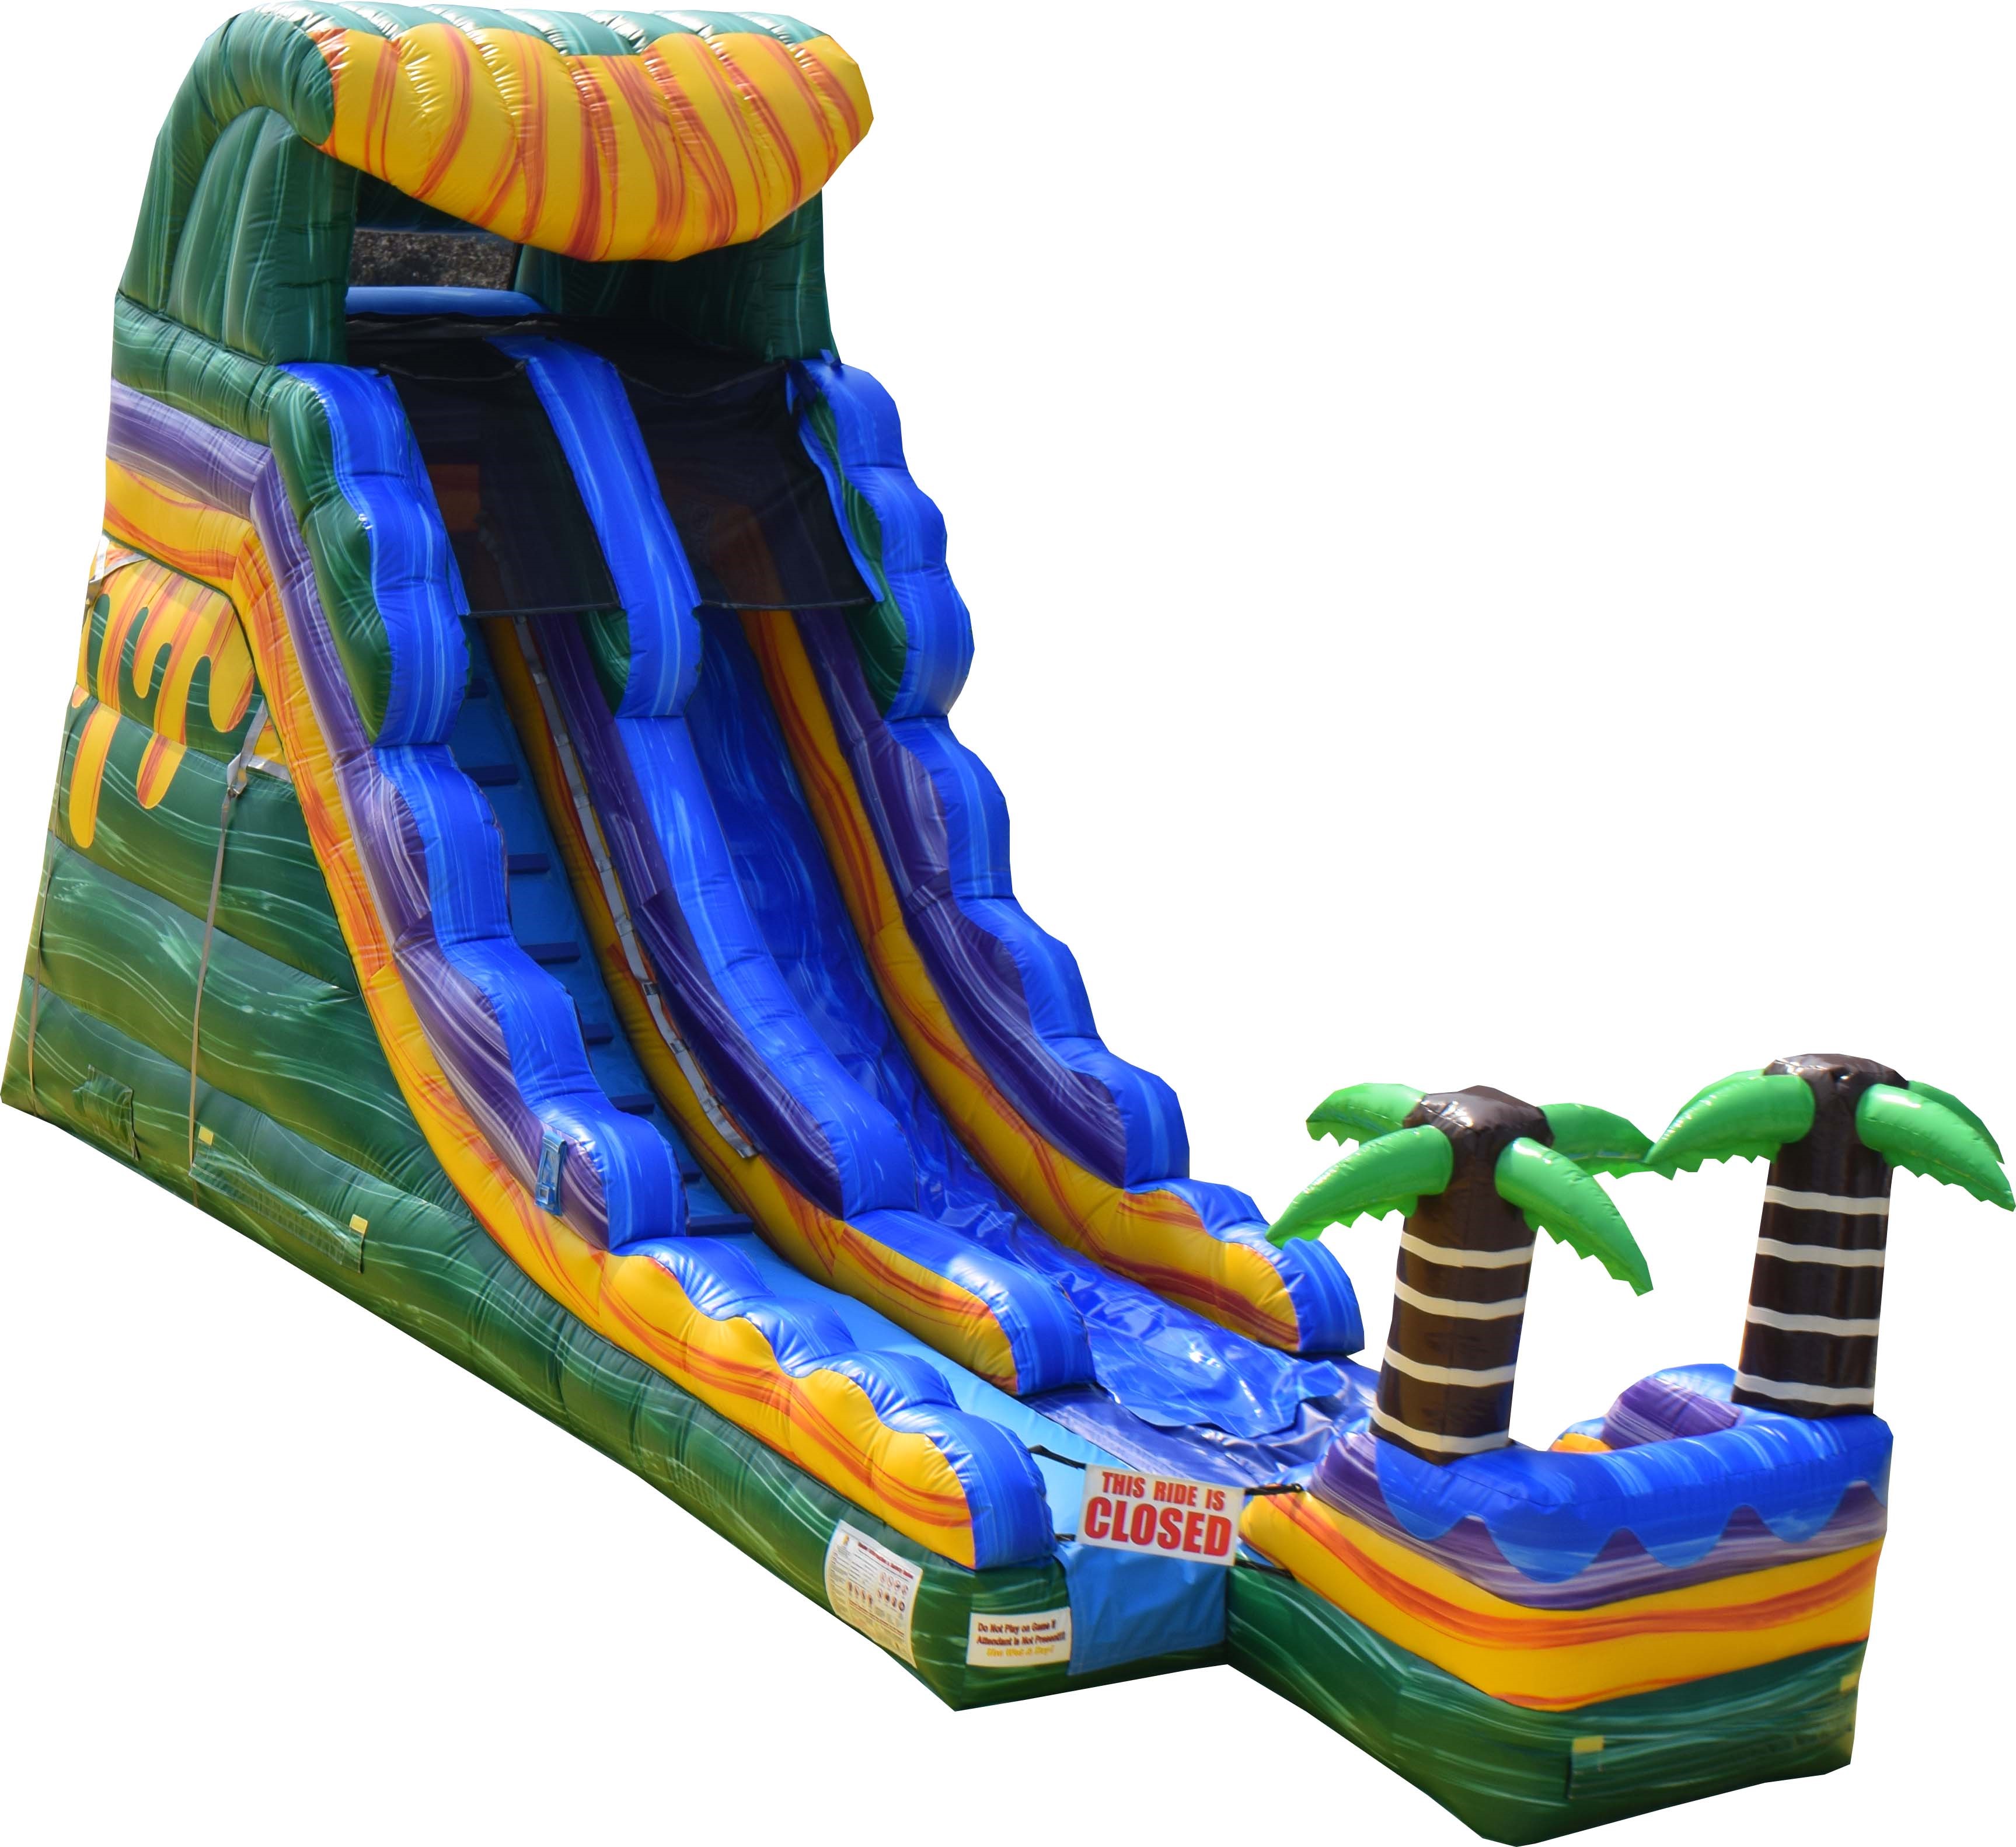 Tropical Dry/Wet Slide – Vancouver PartyWorks